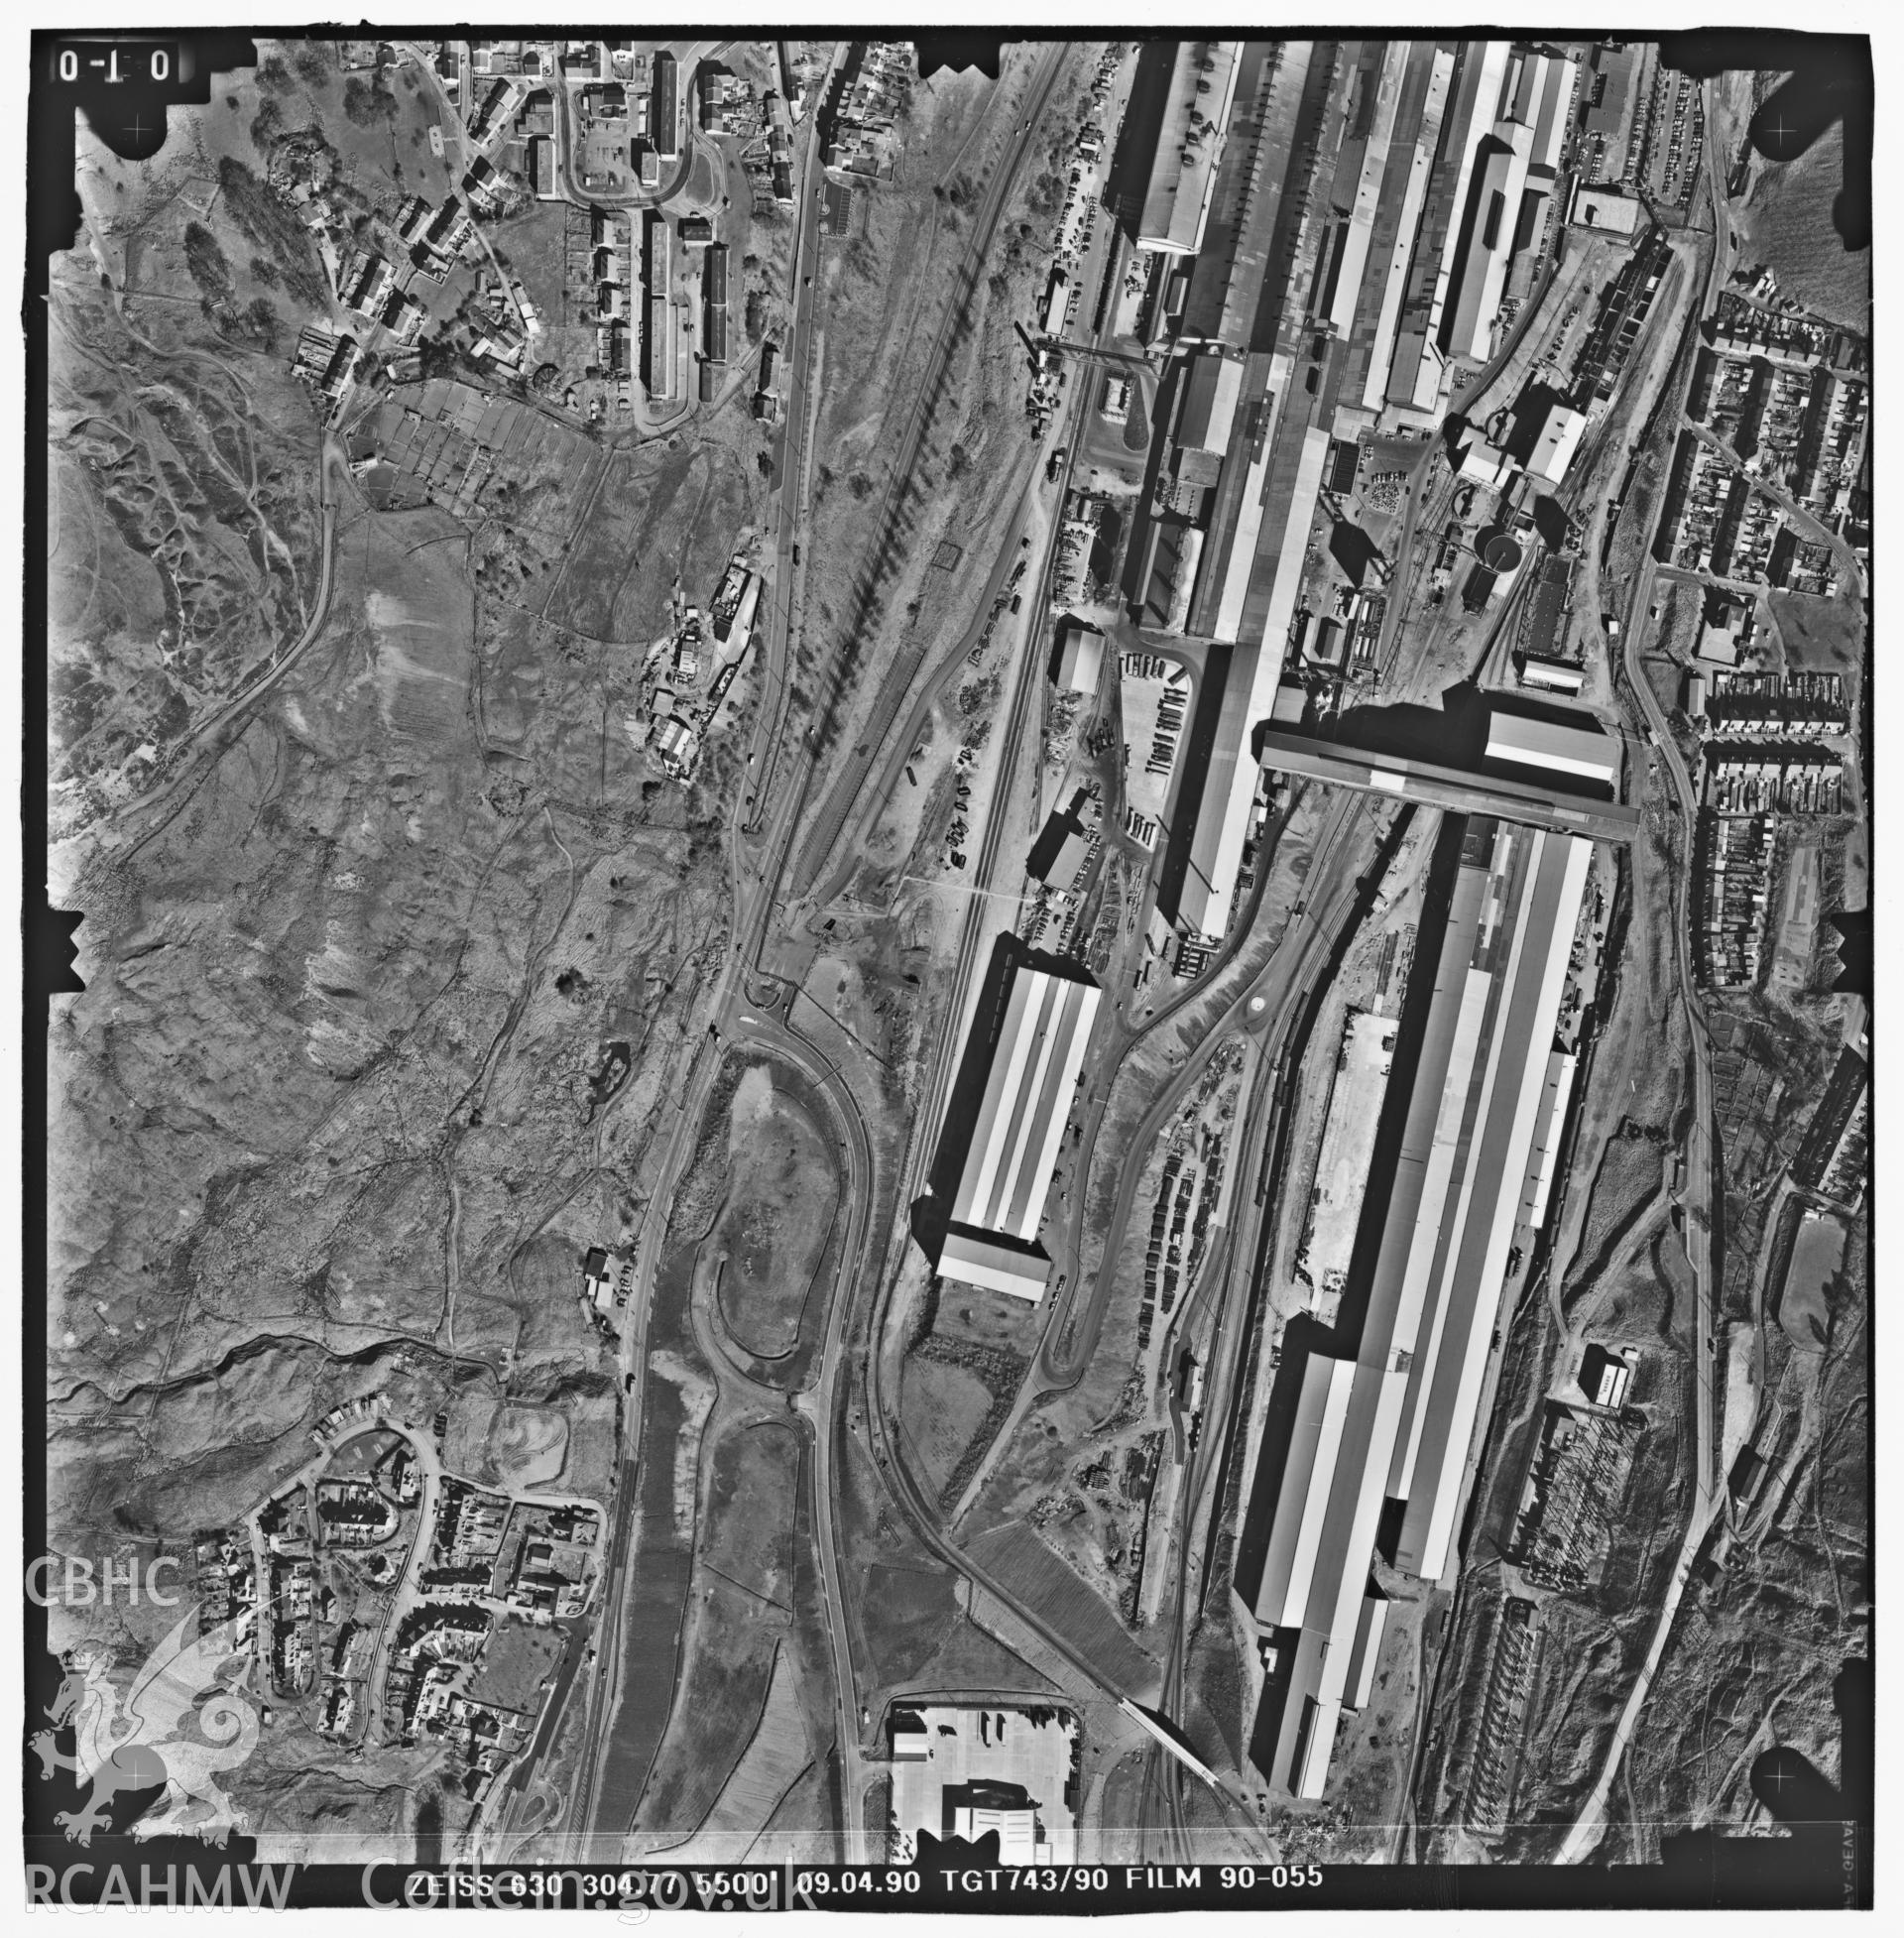 Digitized copy of an aerial photograph showing the Ebbw Vale Steelworks, taken by Ordnance Survey, 1990.